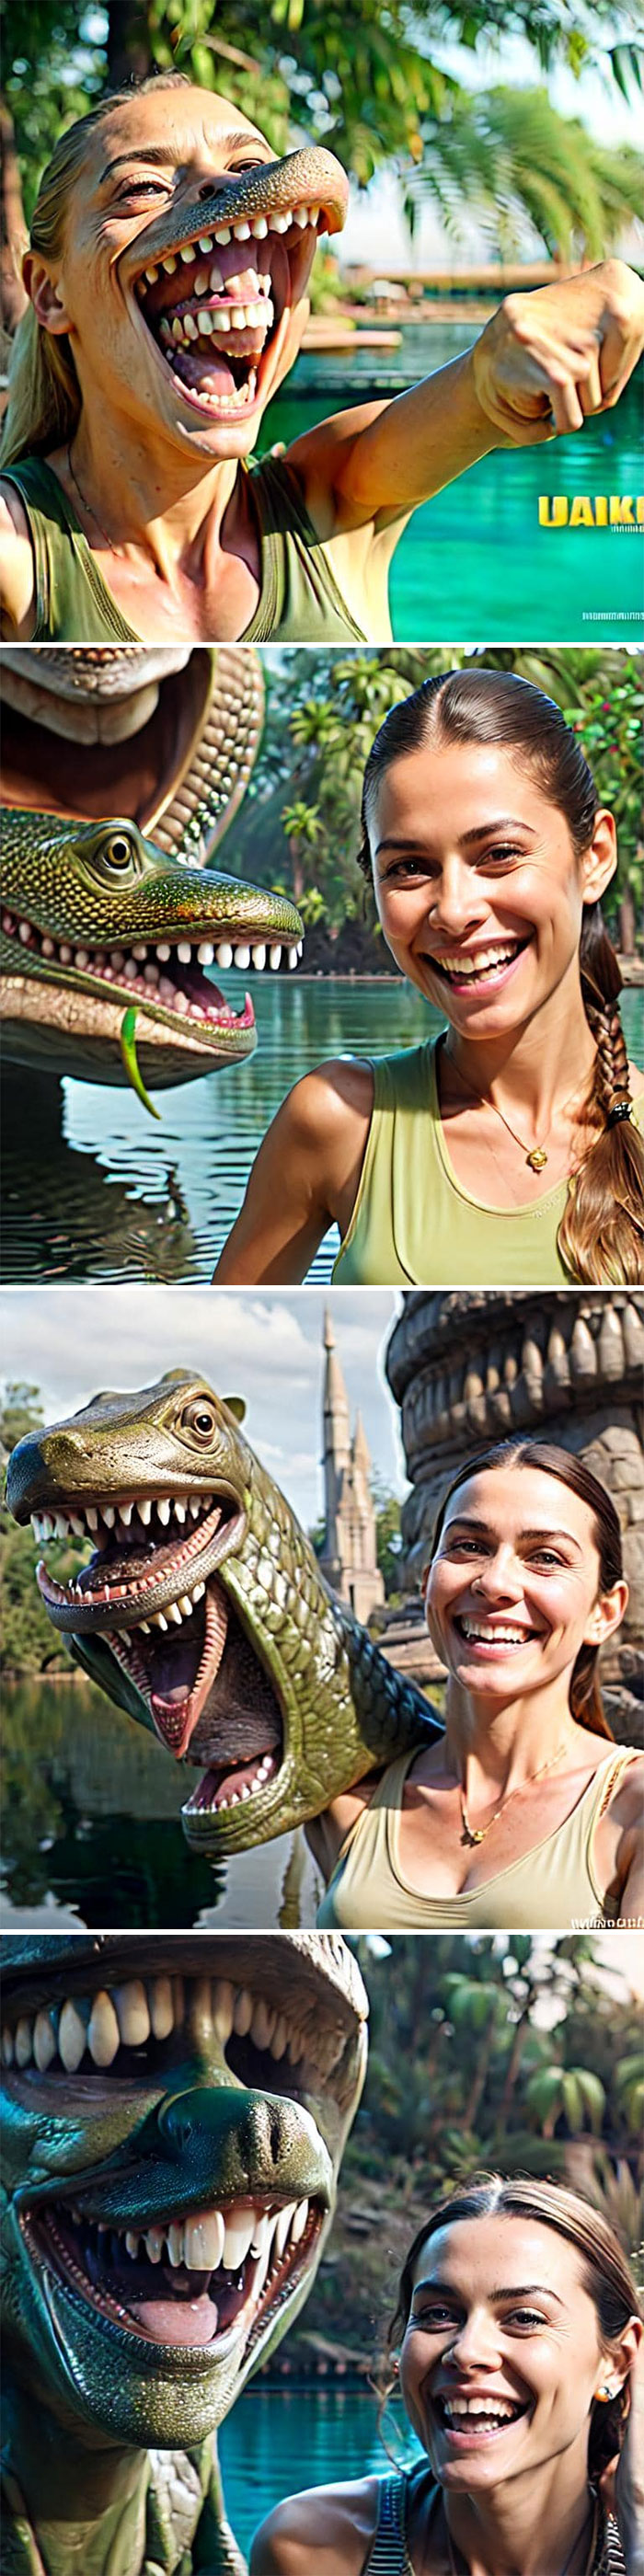 This Was Supposed To Be "Happy Woman Taking A Selfie With A Crocodile" I Don't Think Ai Knows What A Crocodile Is